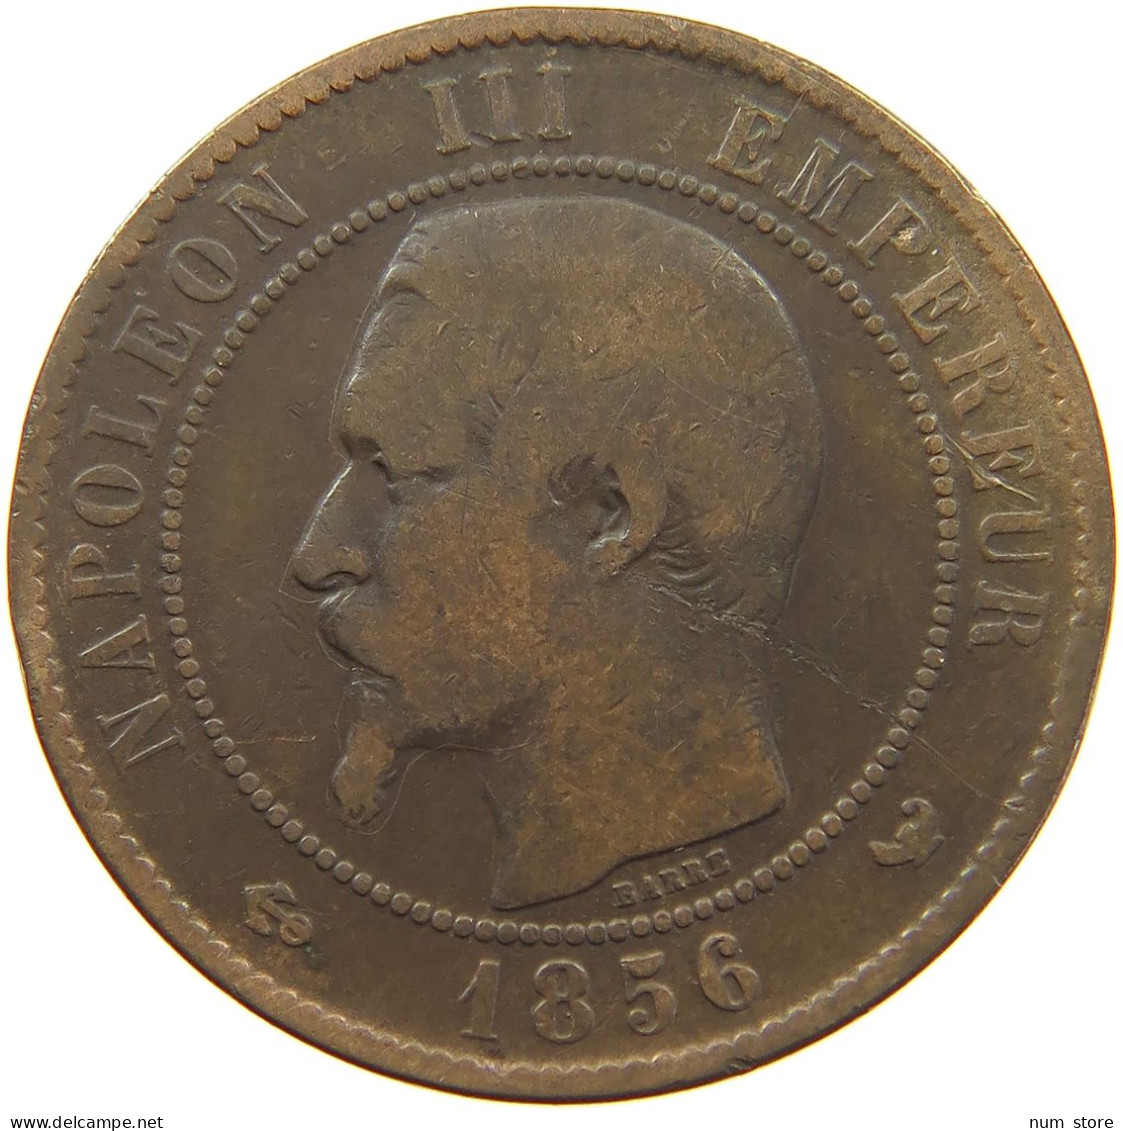 FRANCE 10 CENTIMES 1856 W #a059 0341 - 10 Centimes